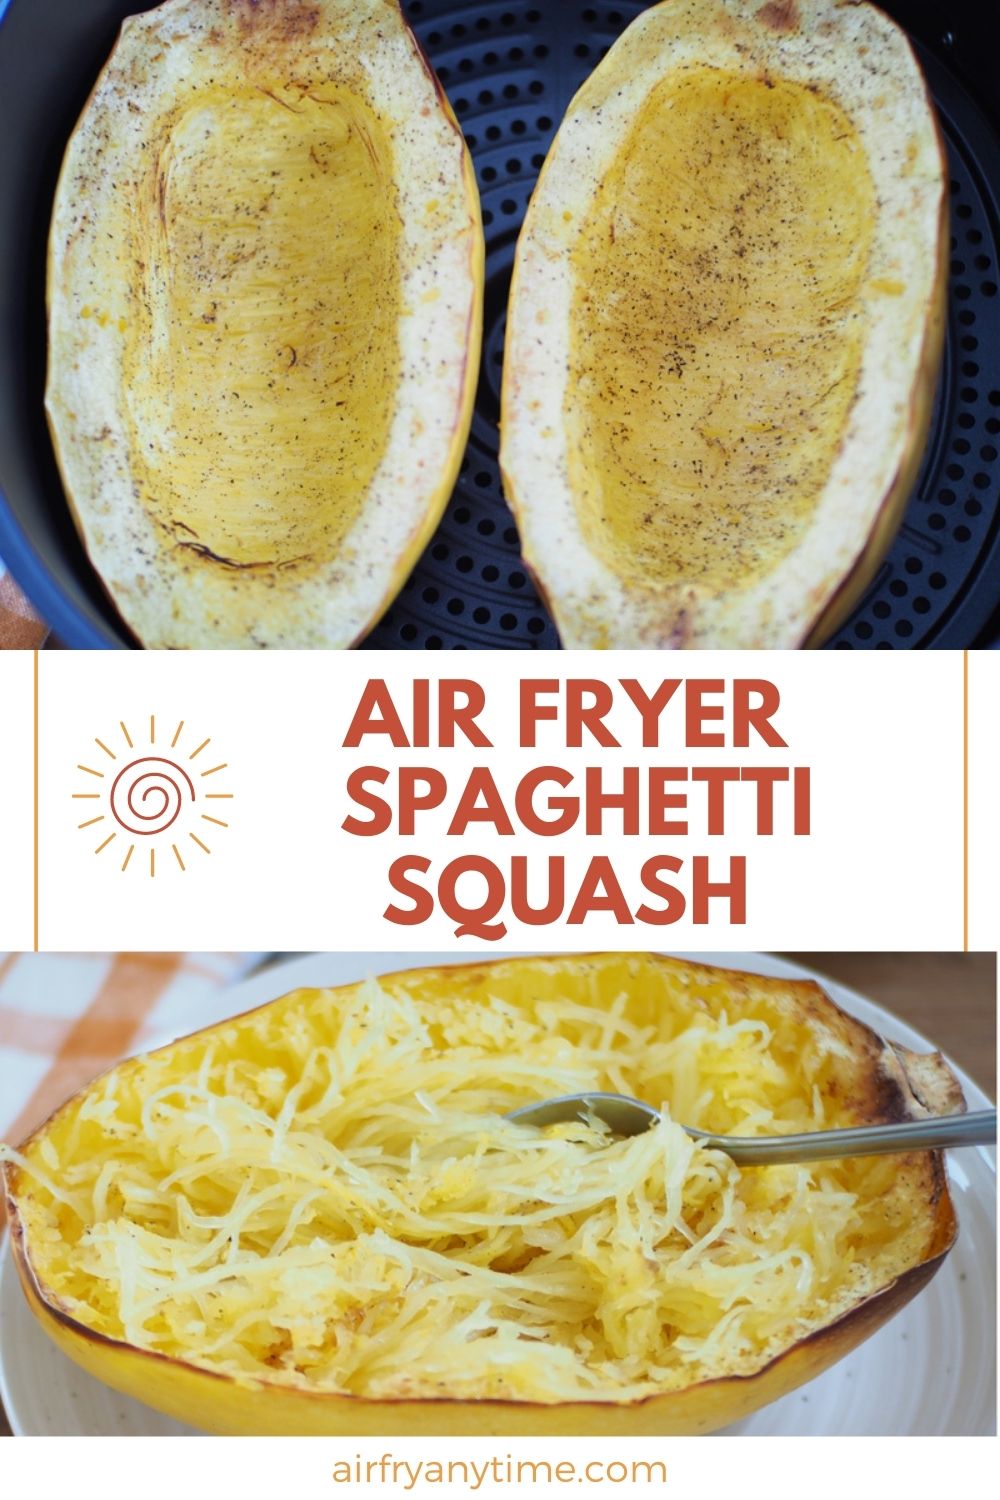 halved spaghetti squash in the air fryer basket and half of a squash shredded.